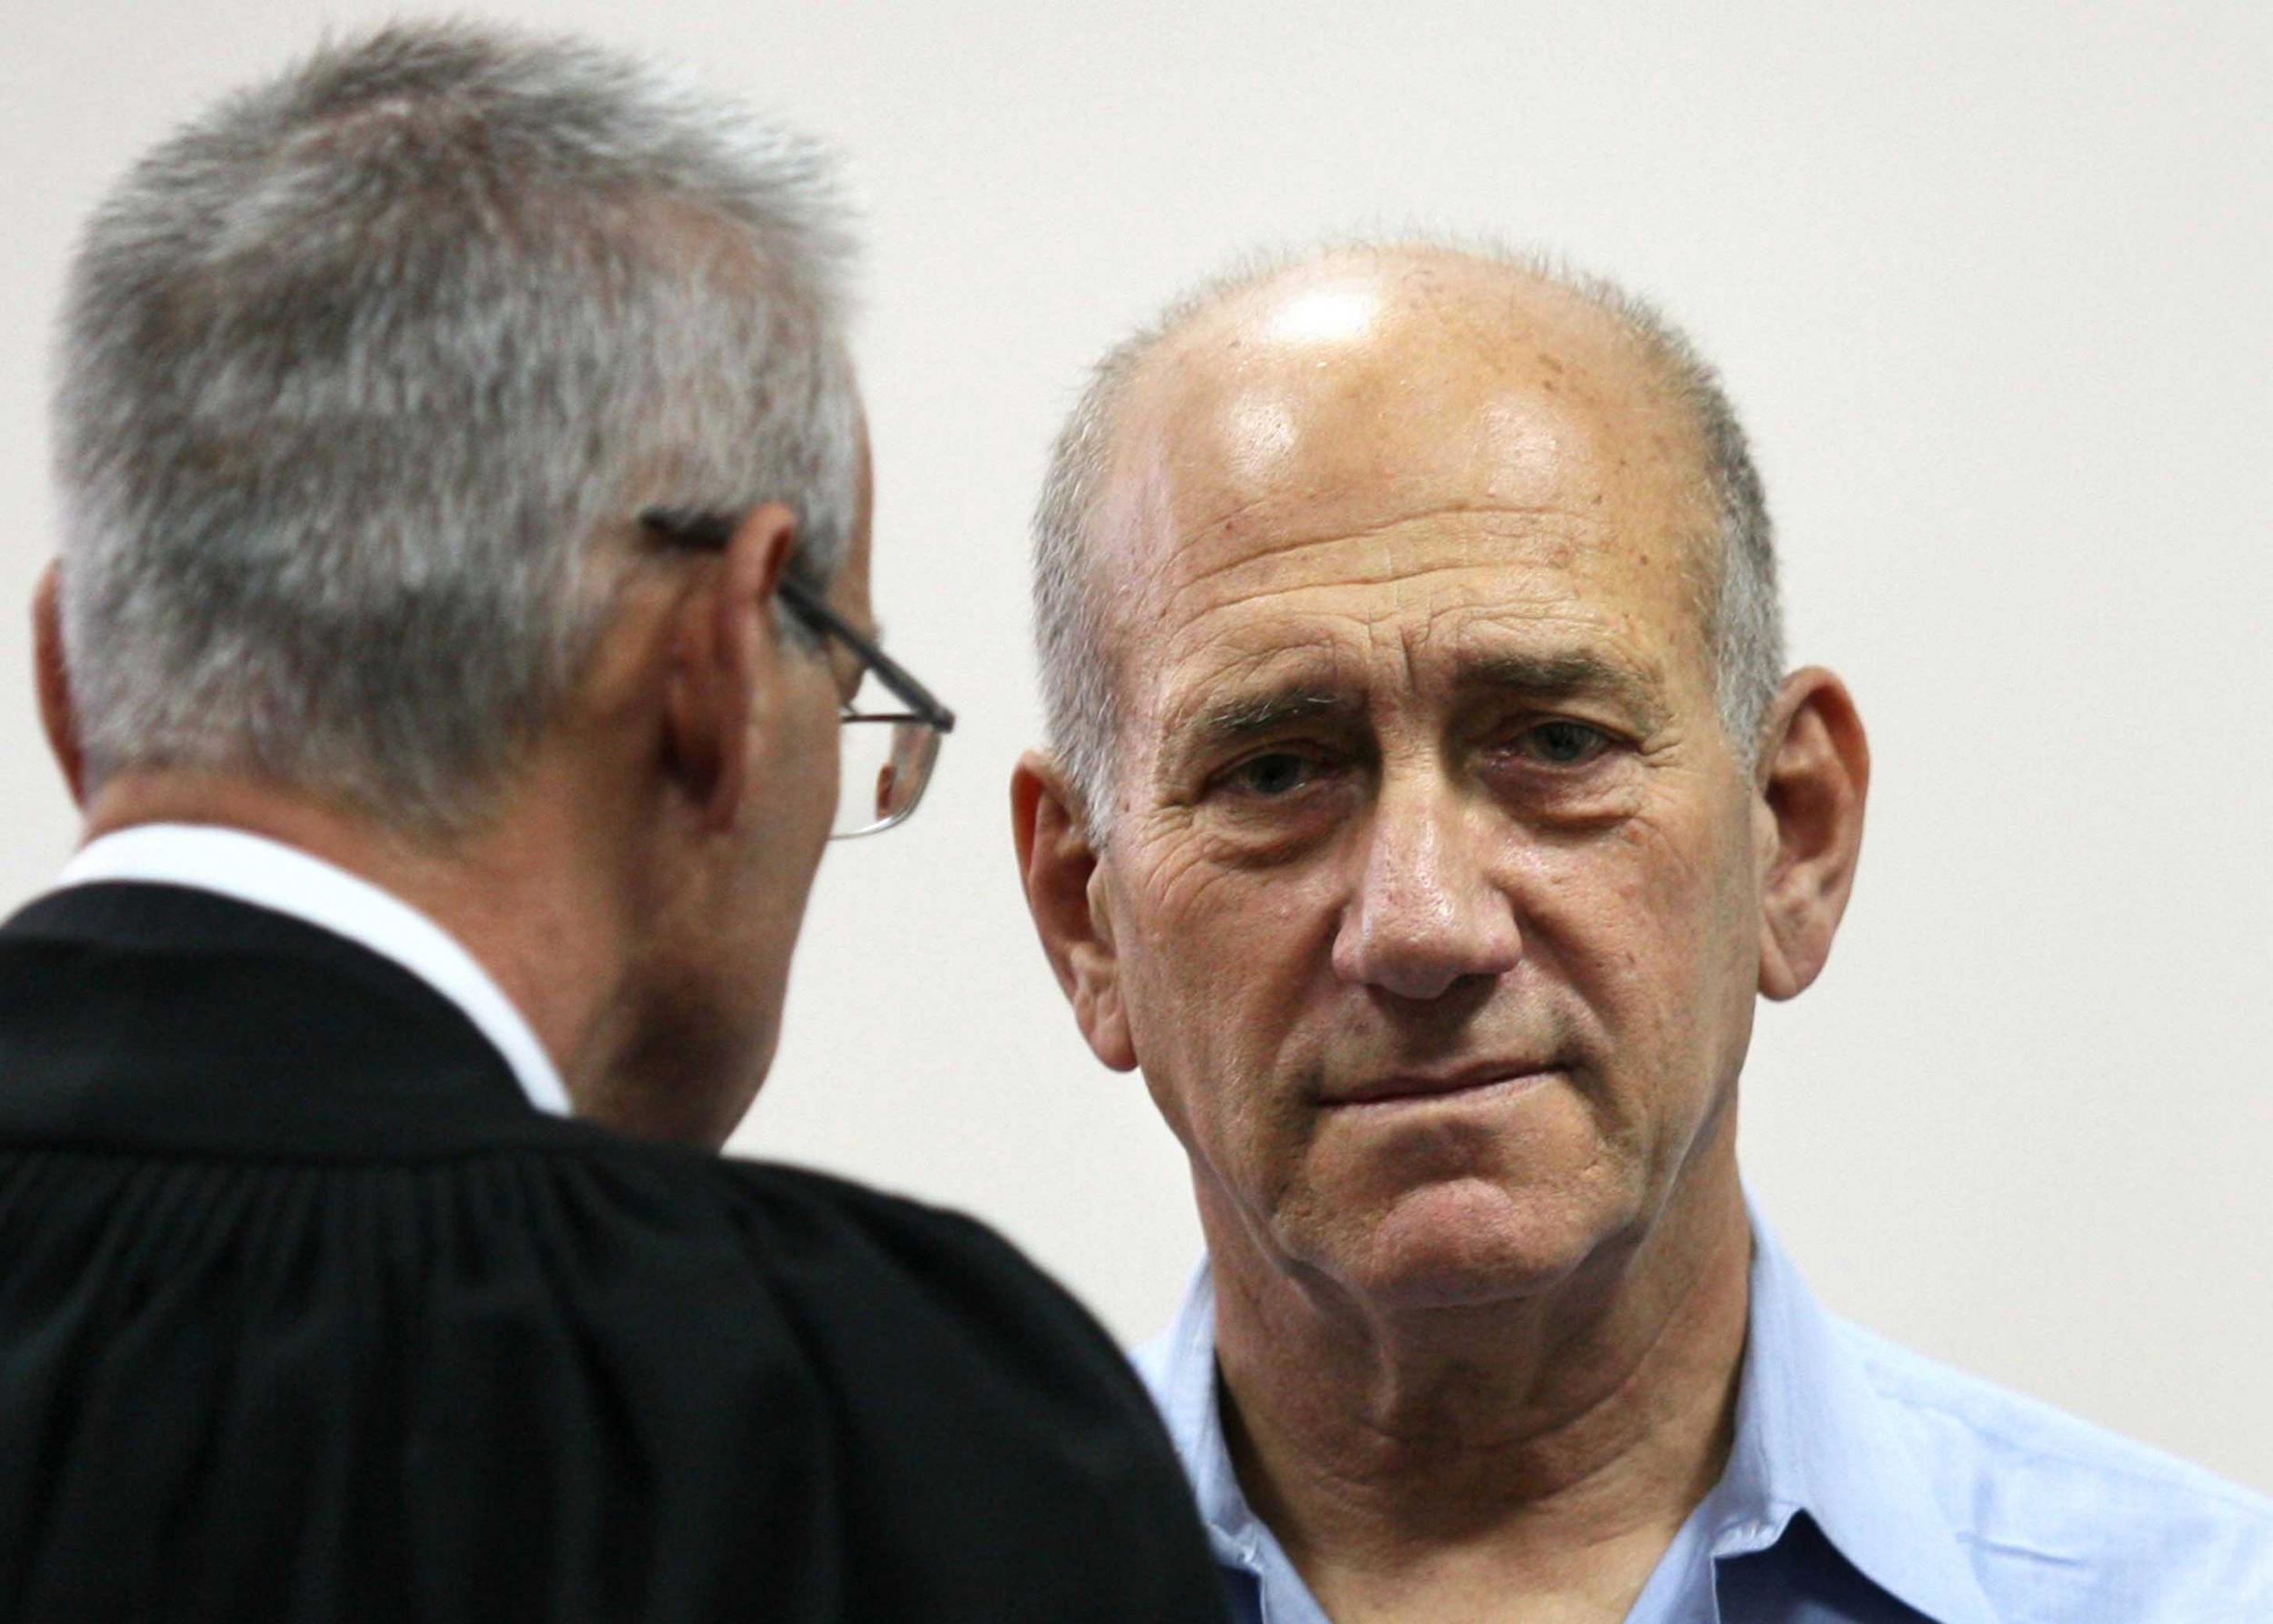 Olmert will begin serving his reduced sentence on 15 February